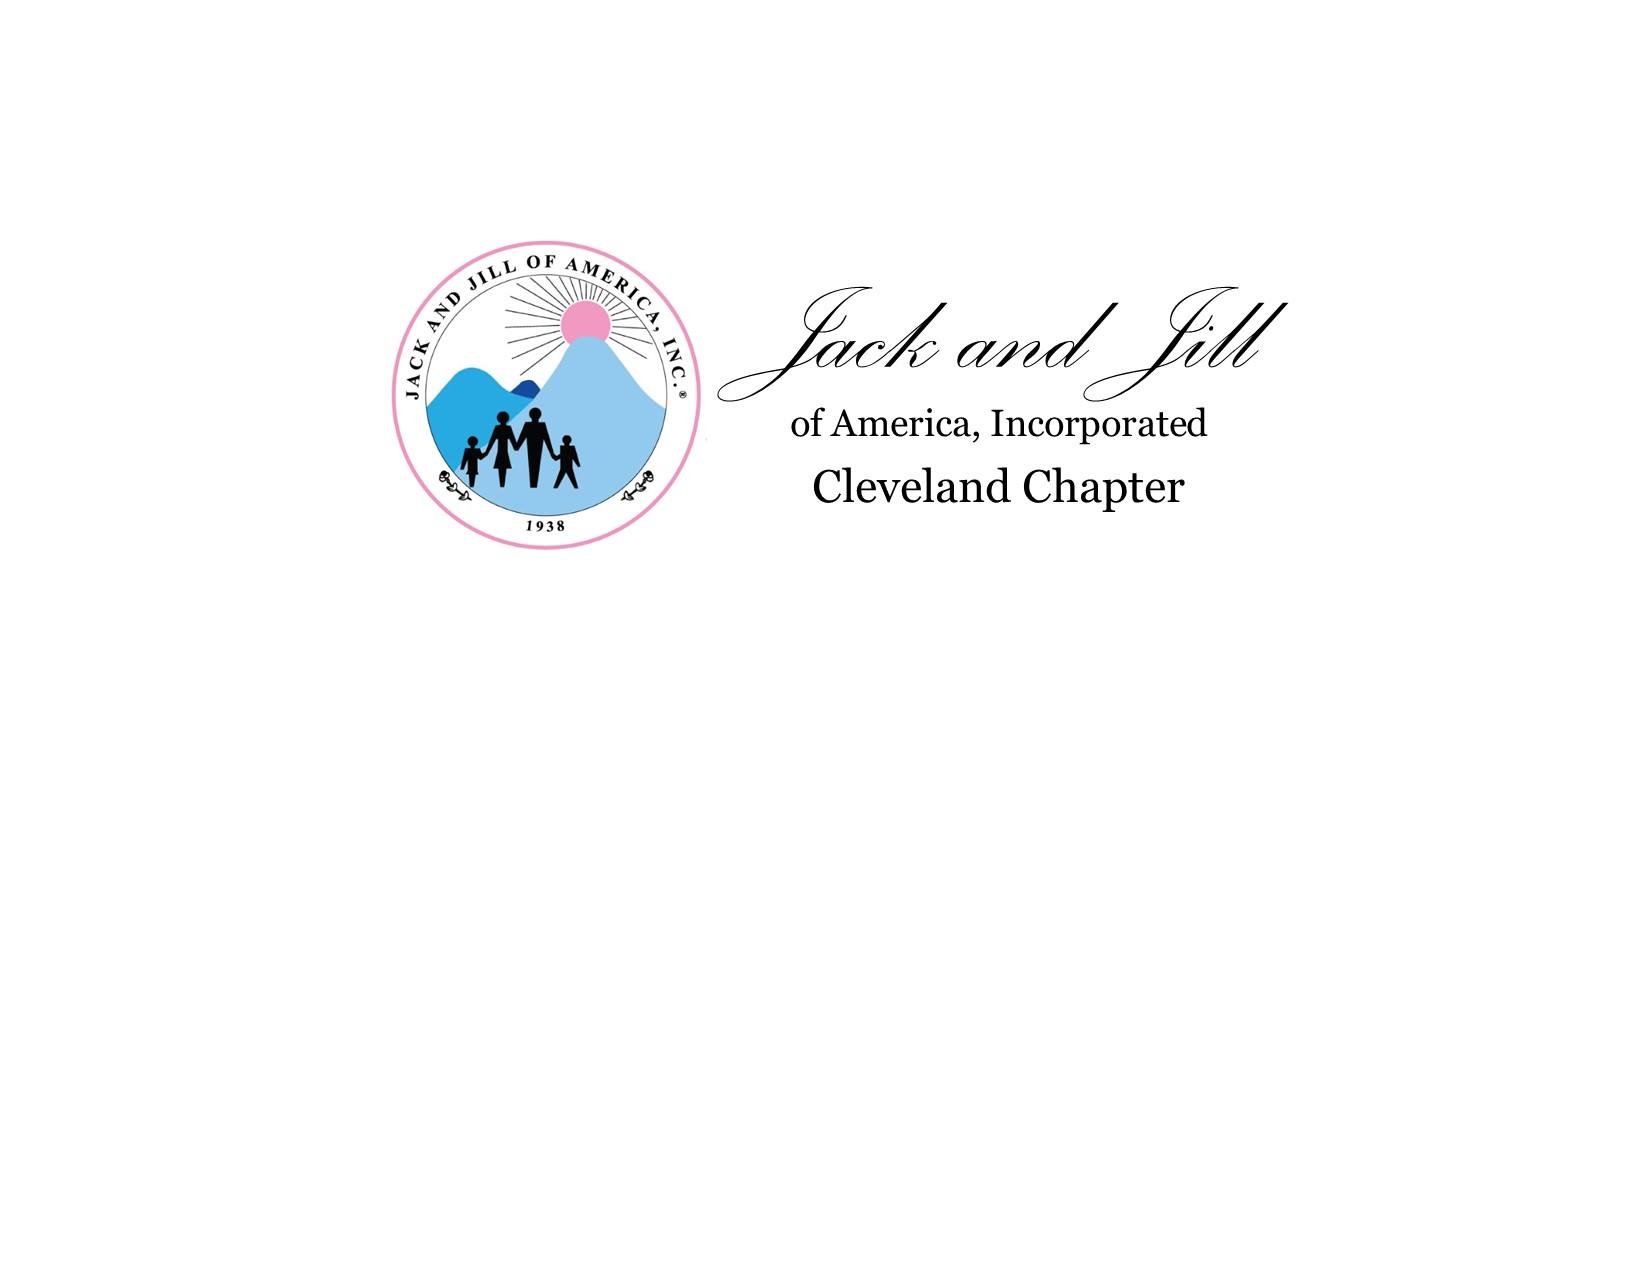 Jack and Jill of America, Inc., Cleveland Chapter